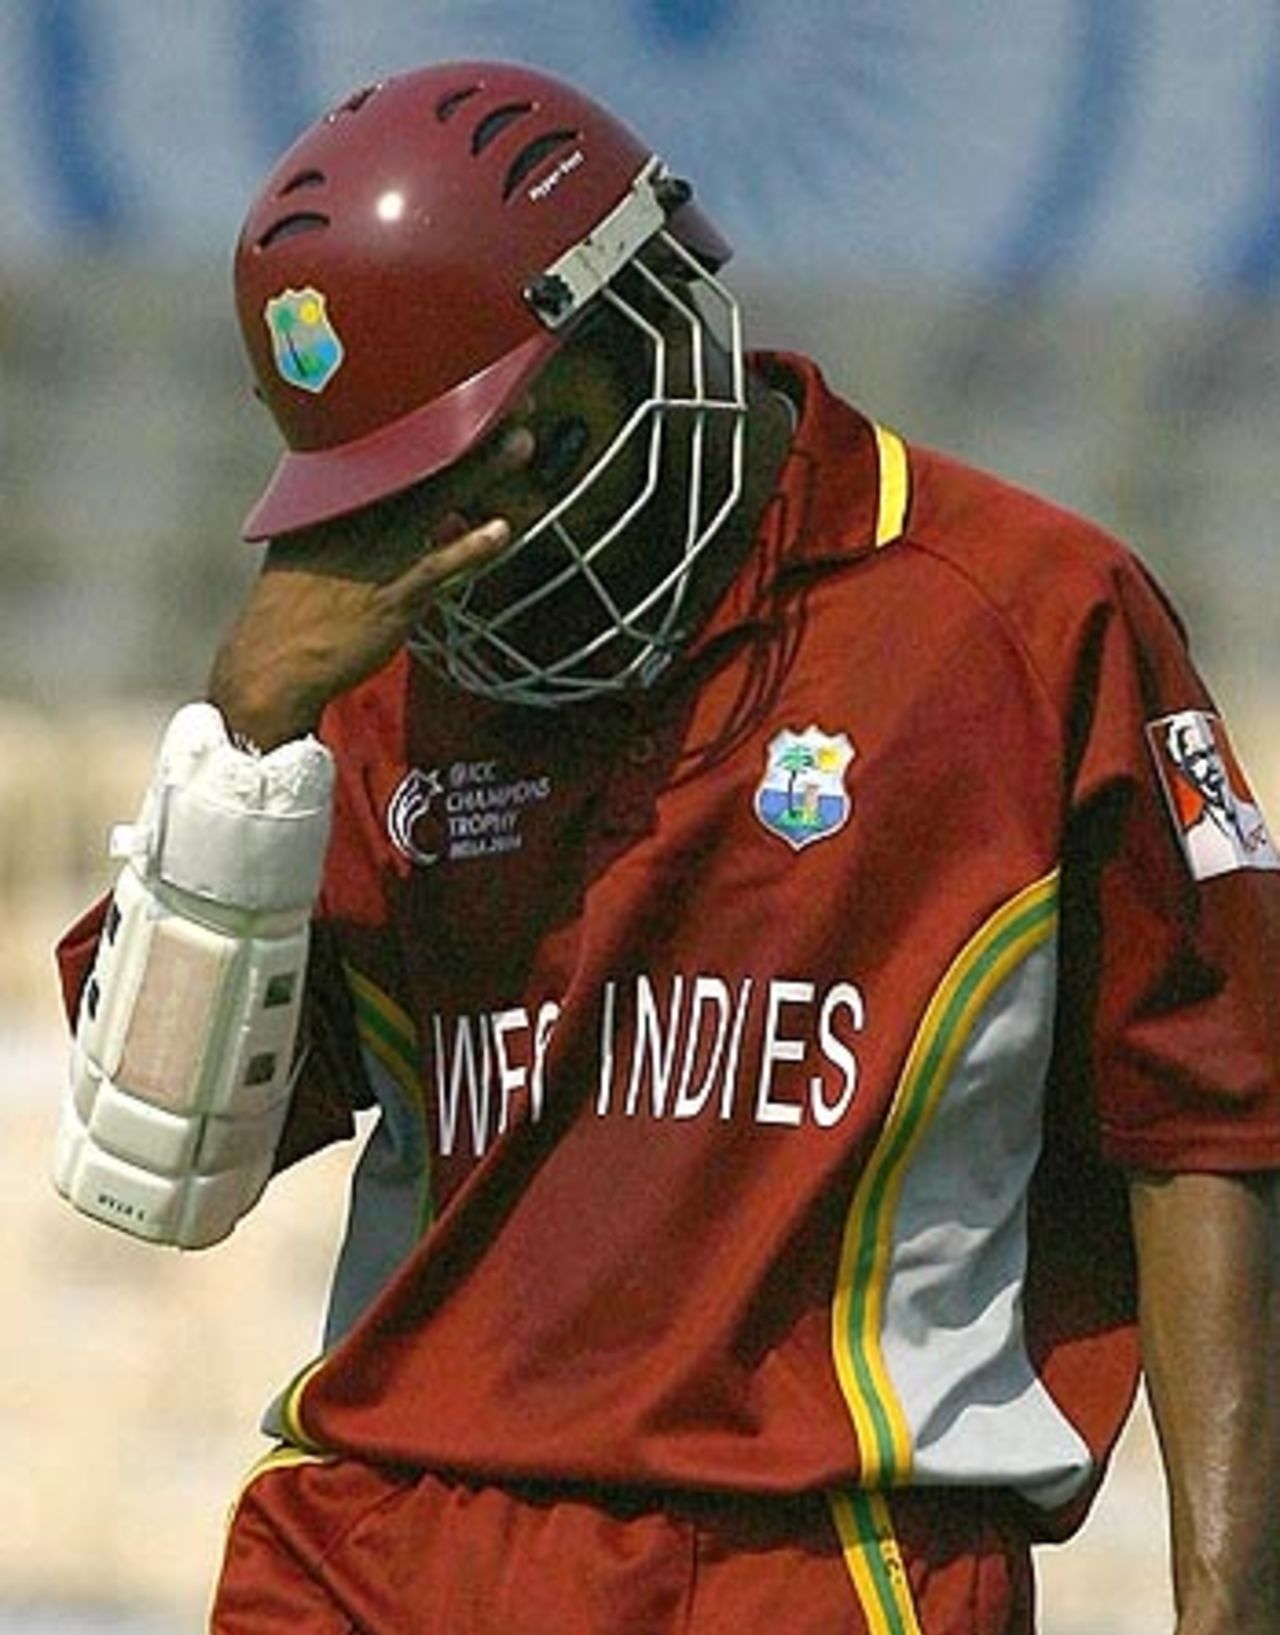 It's all wrong: Chanderpaul's face reflects the West Indian collapse, Sri Lanka v West Indies, 6th qualifying match, Champions Trophy, Mumbai, October 14, 2006